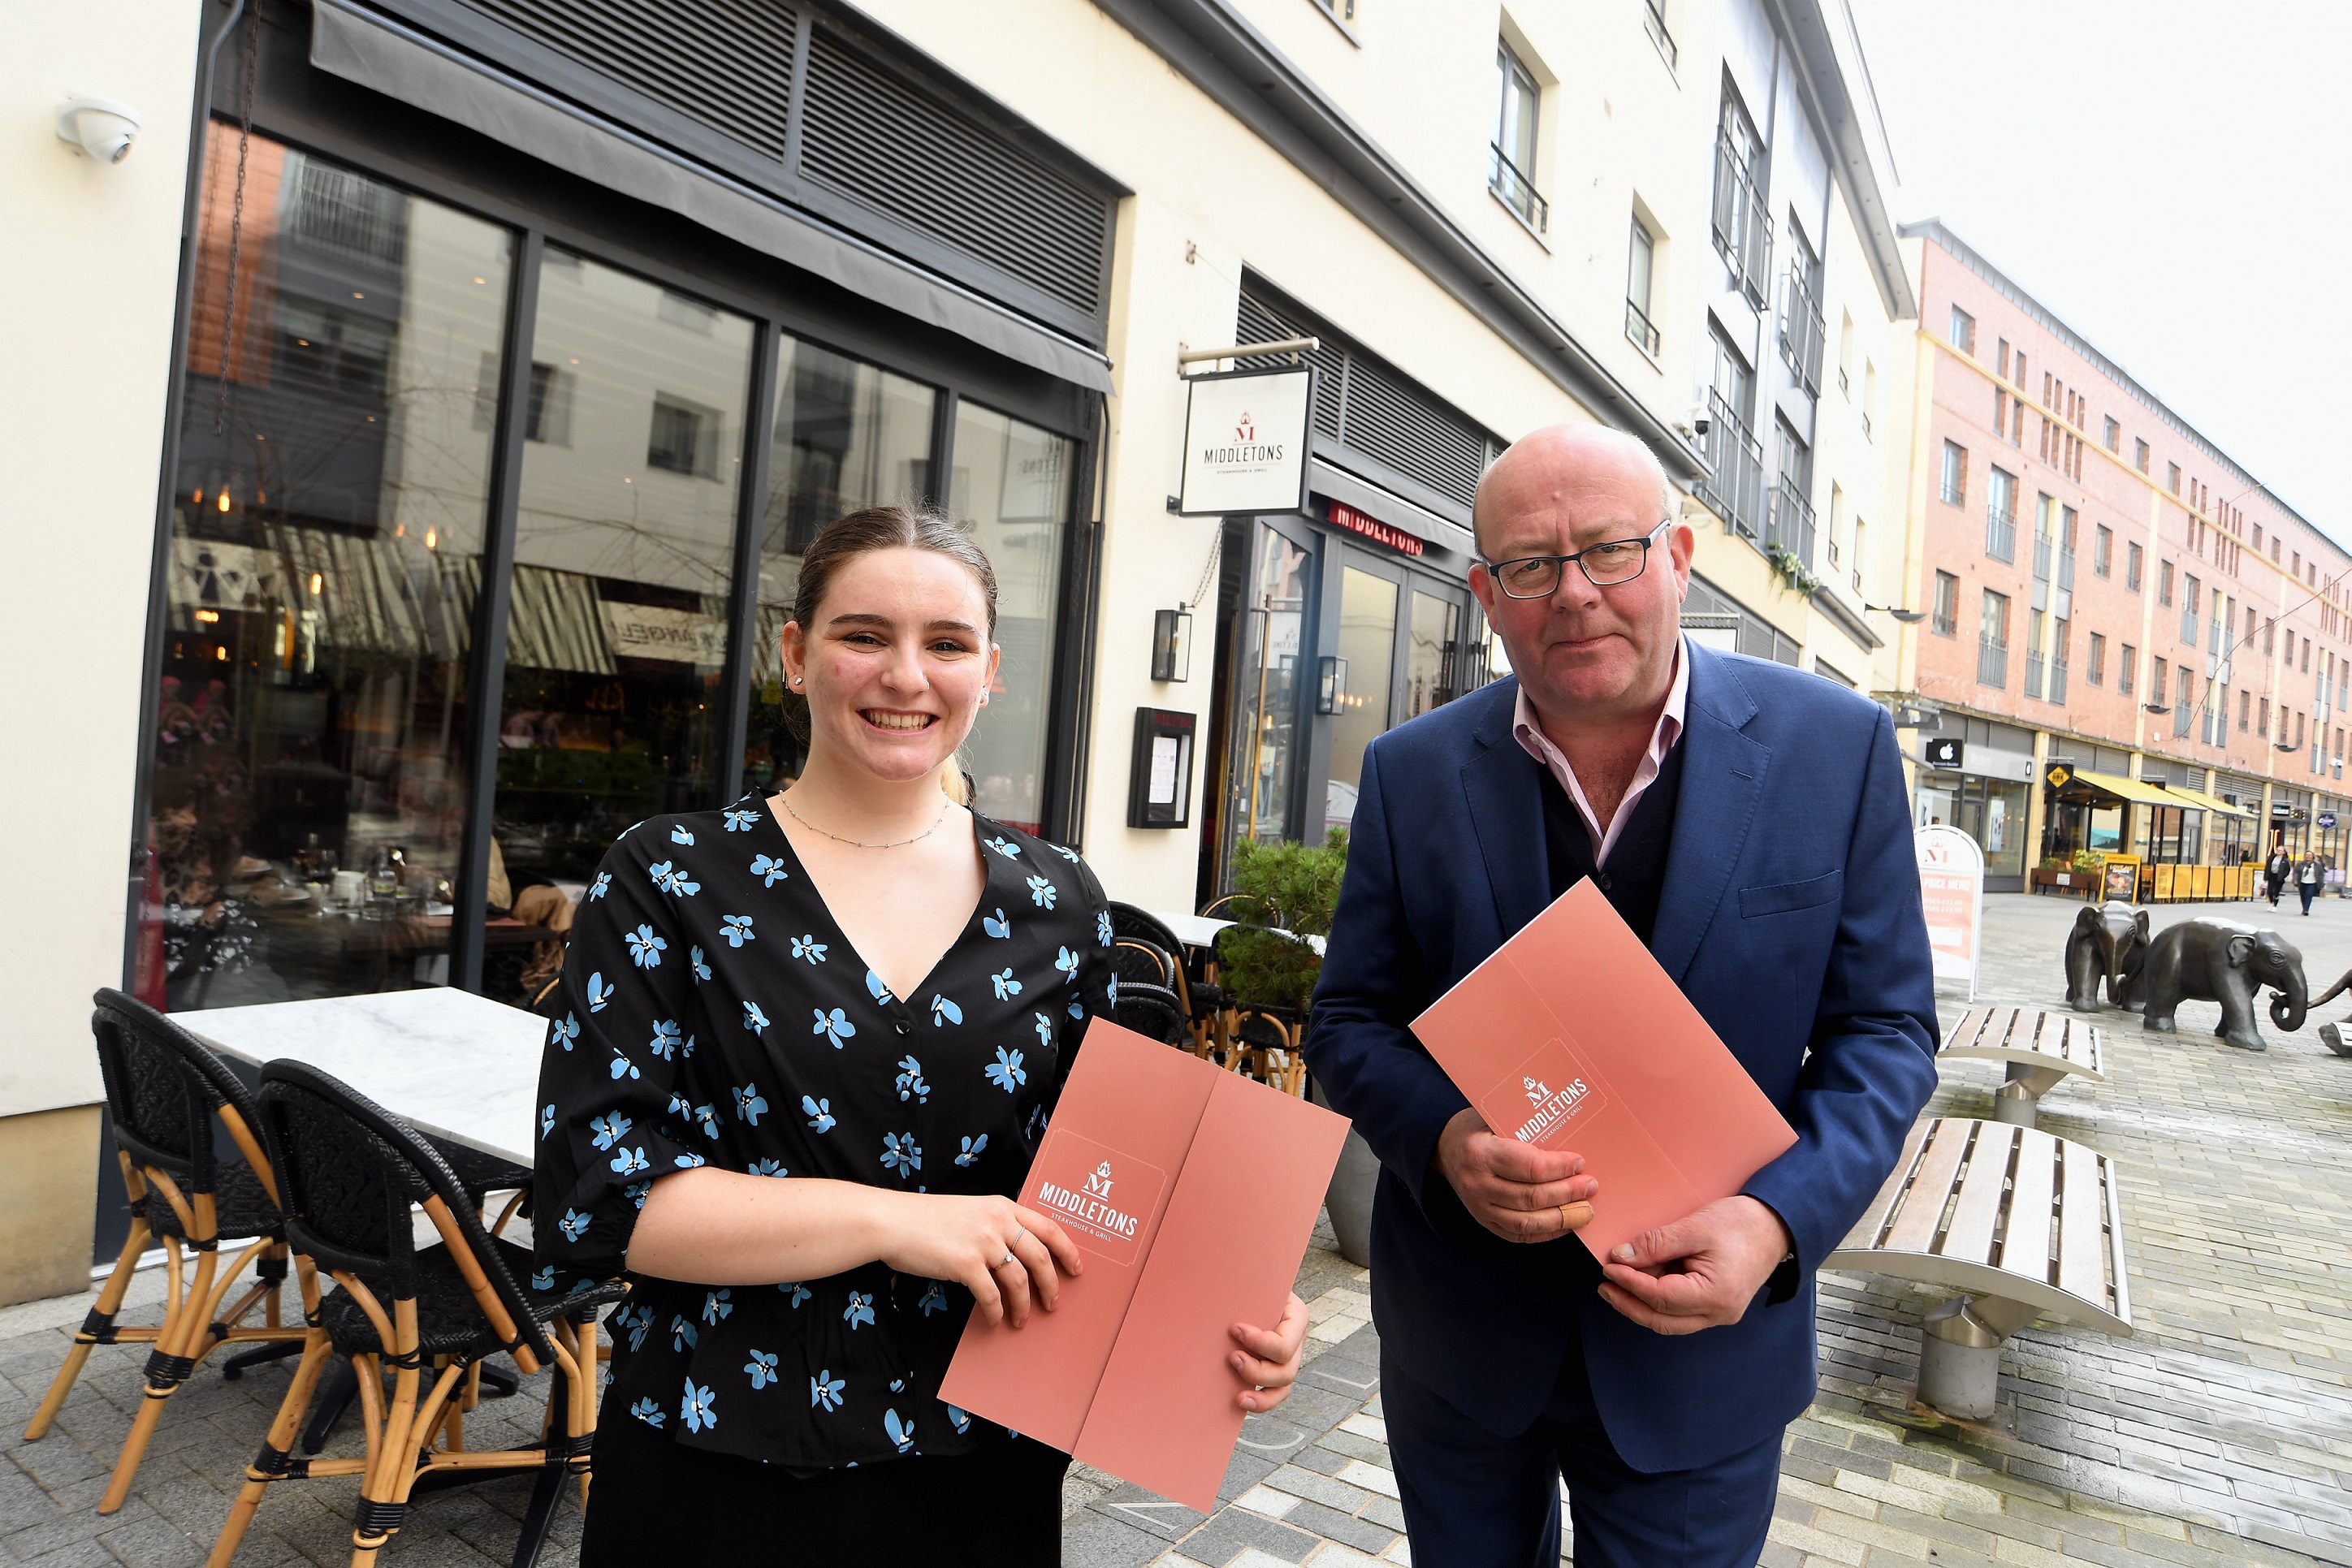 New steak restaurant opening in Leamington highlights town’s resilience